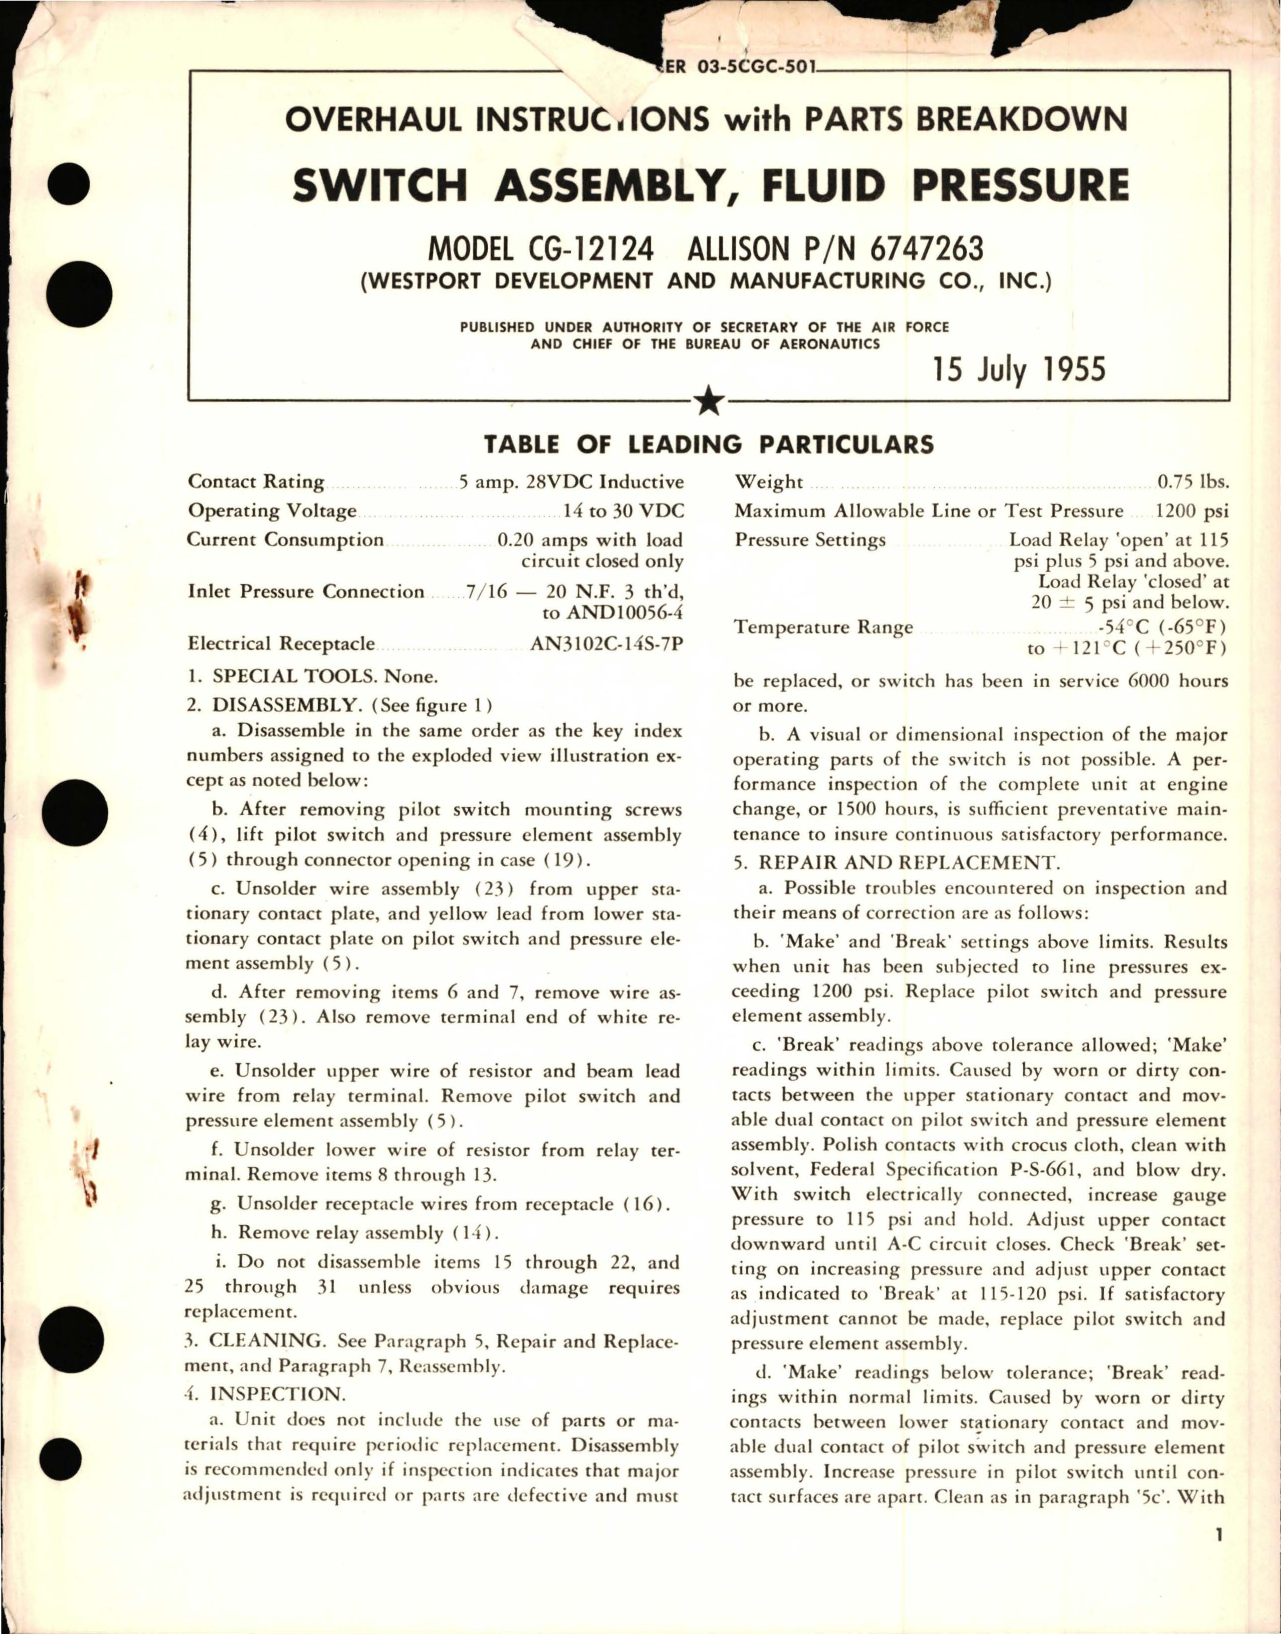 Sample page 1 from AirCorps Library document: Overhaul Instructions with Parts Breakdown for Switch Assembly, Fluid Pressure - Model CG-12124 - Allison Part 6747263